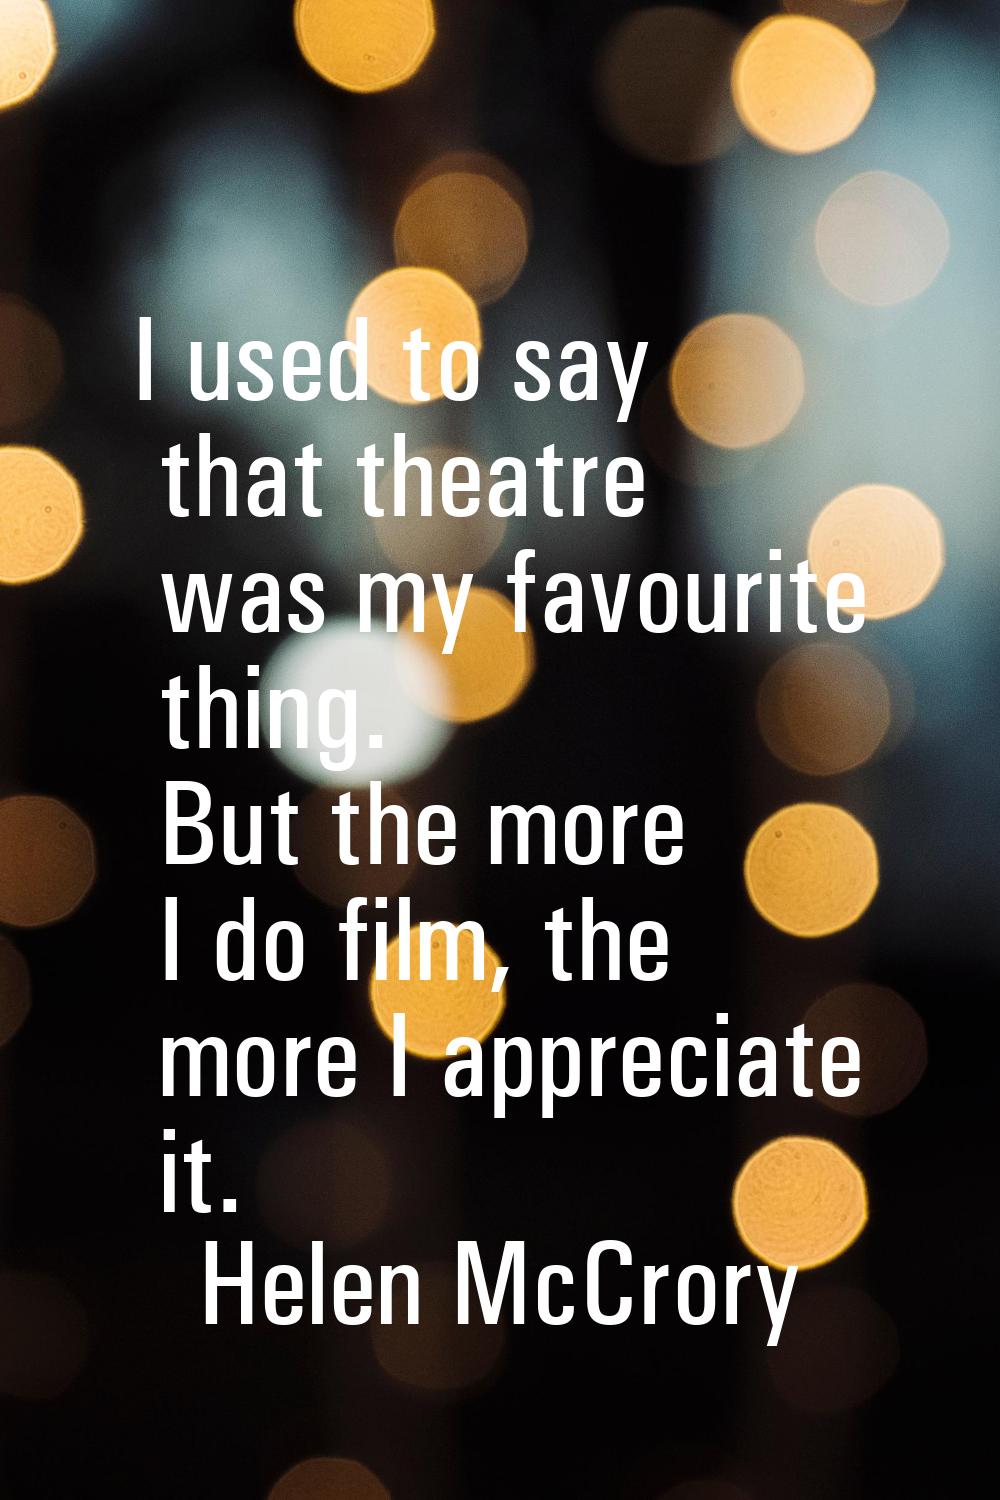 I used to say that theatre was my favourite thing. But the more I do film, the more I appreciate it